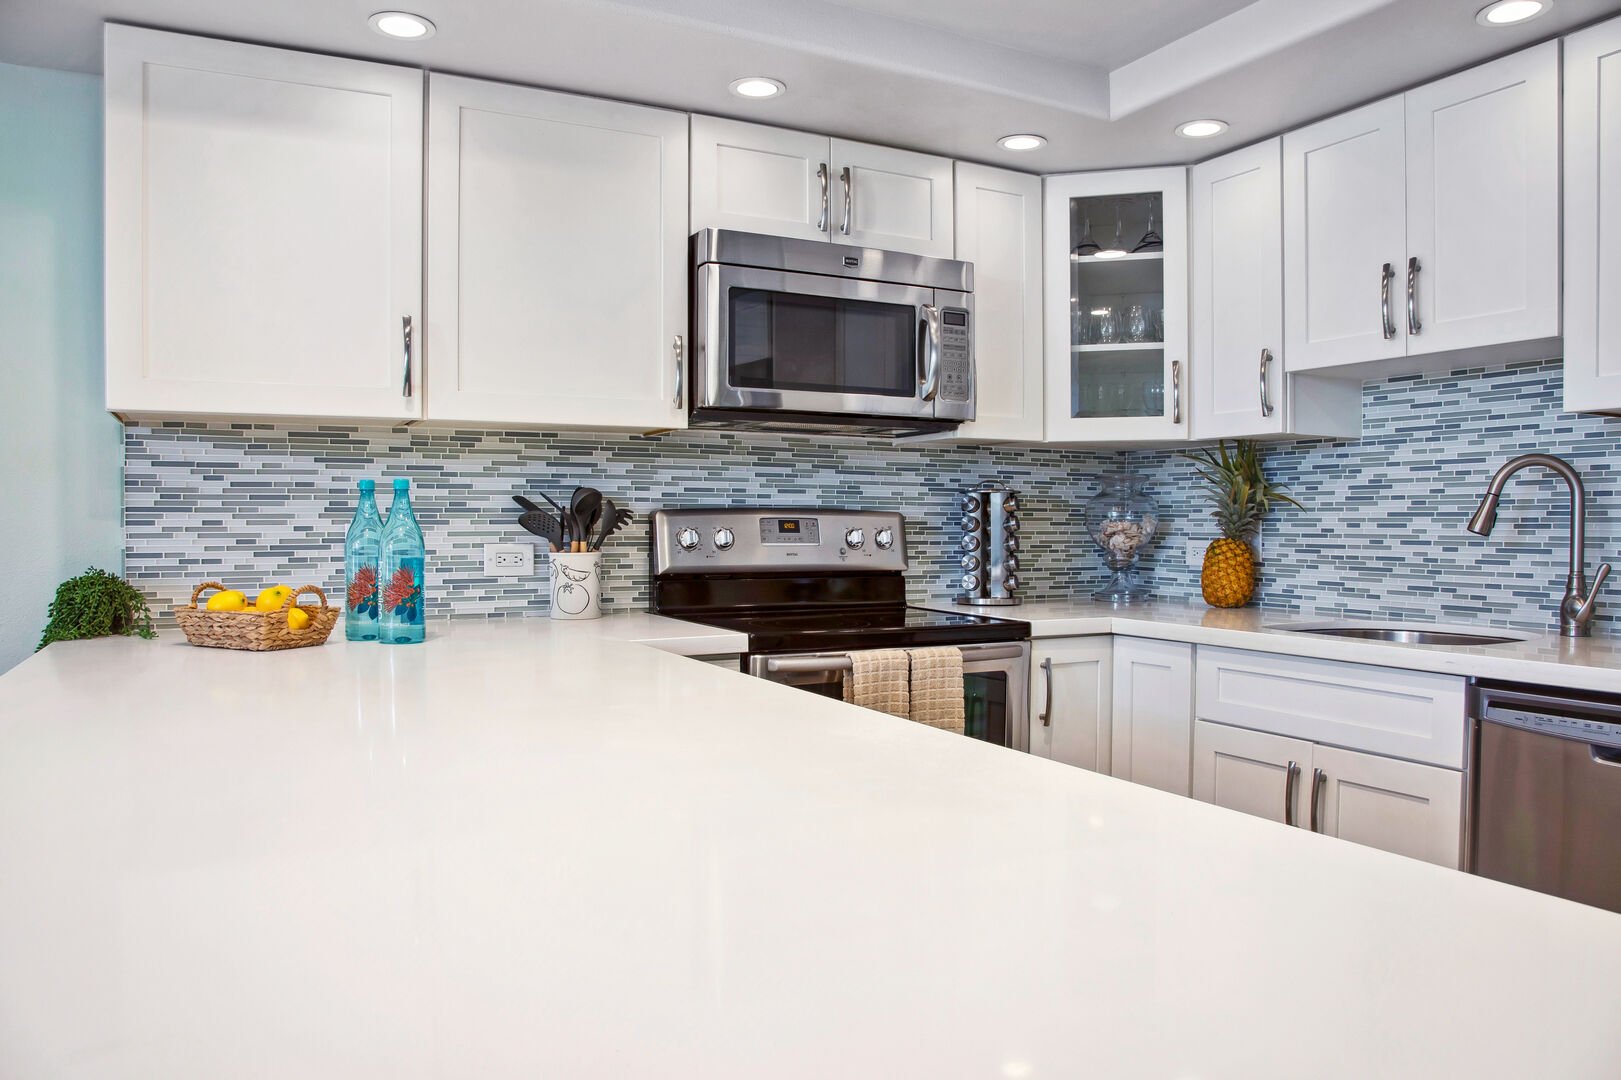 Fully equipped kitchen with countertop, and full-size appliances.